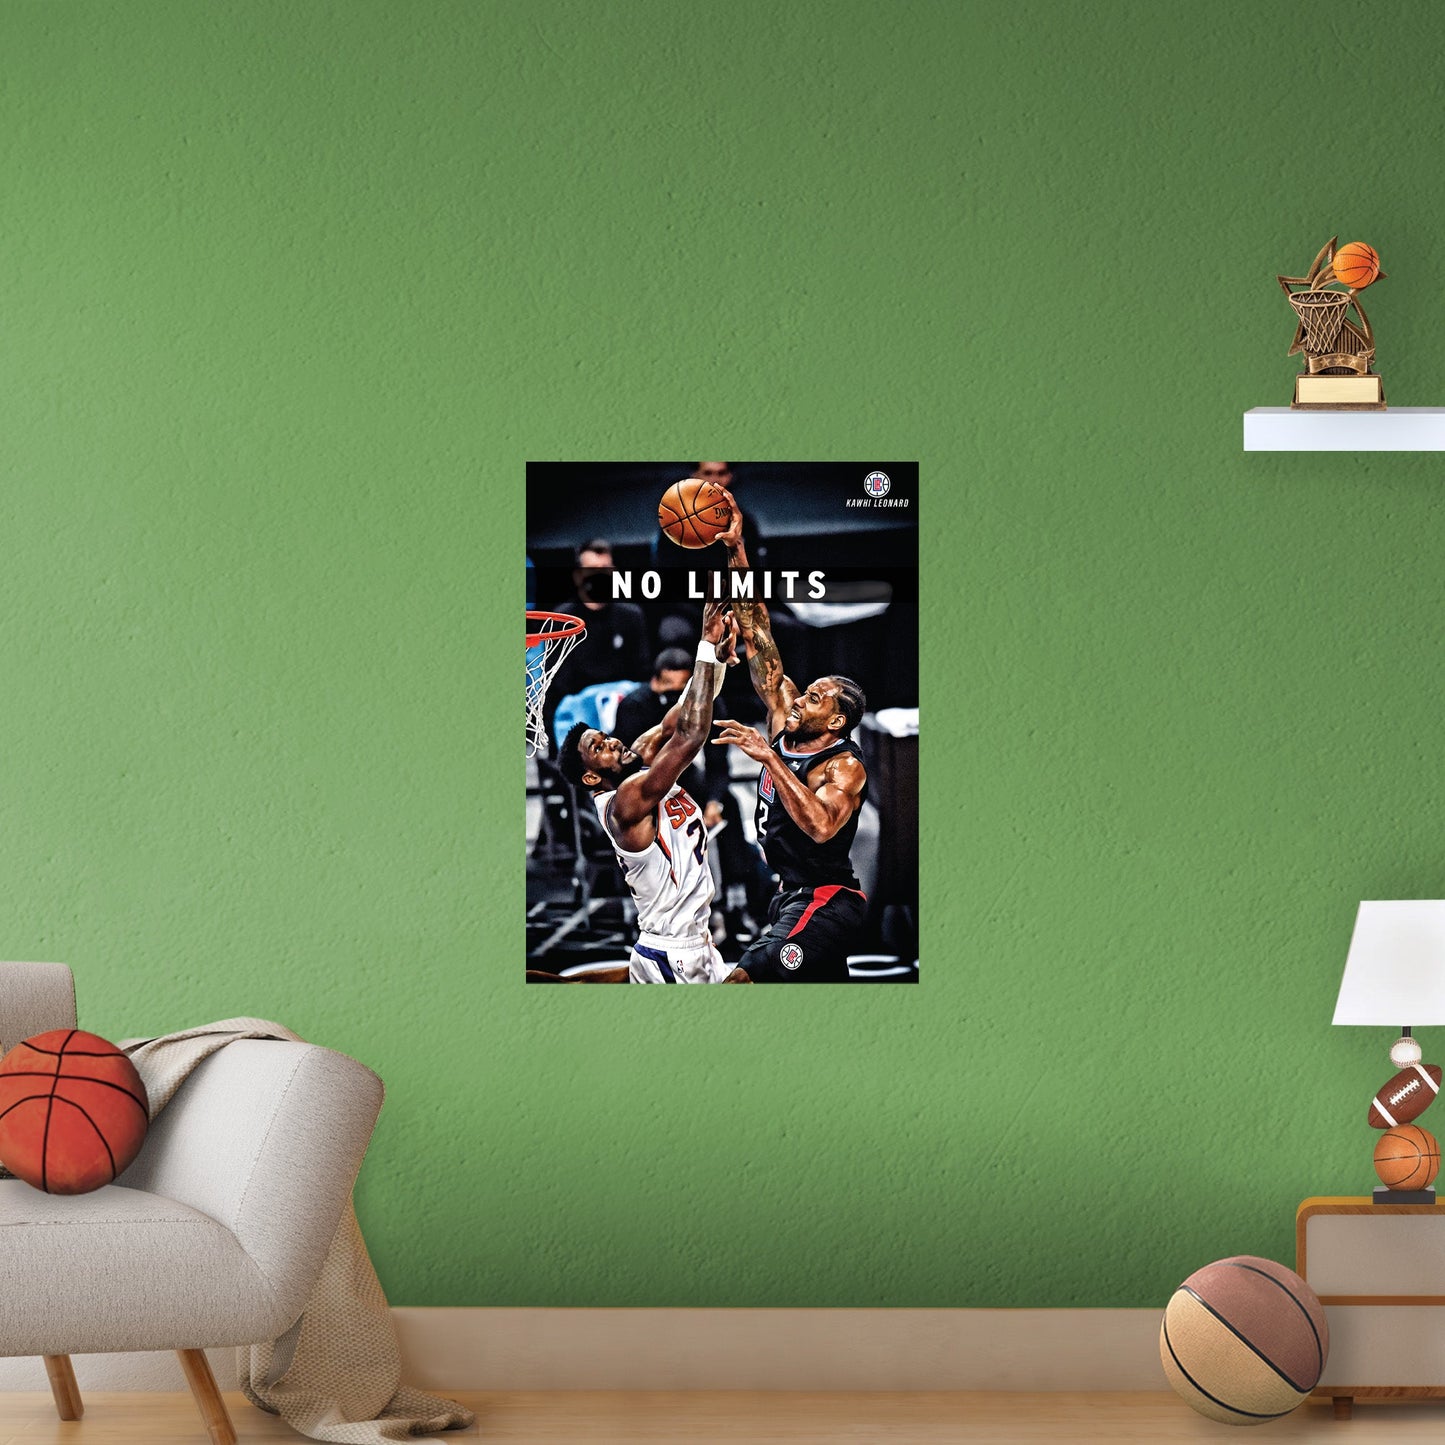 Los Angeles Clippers: Kawhi Leonard Scoring Motivational Poster - Officially Licensed NBA Removable Adhesive Decal